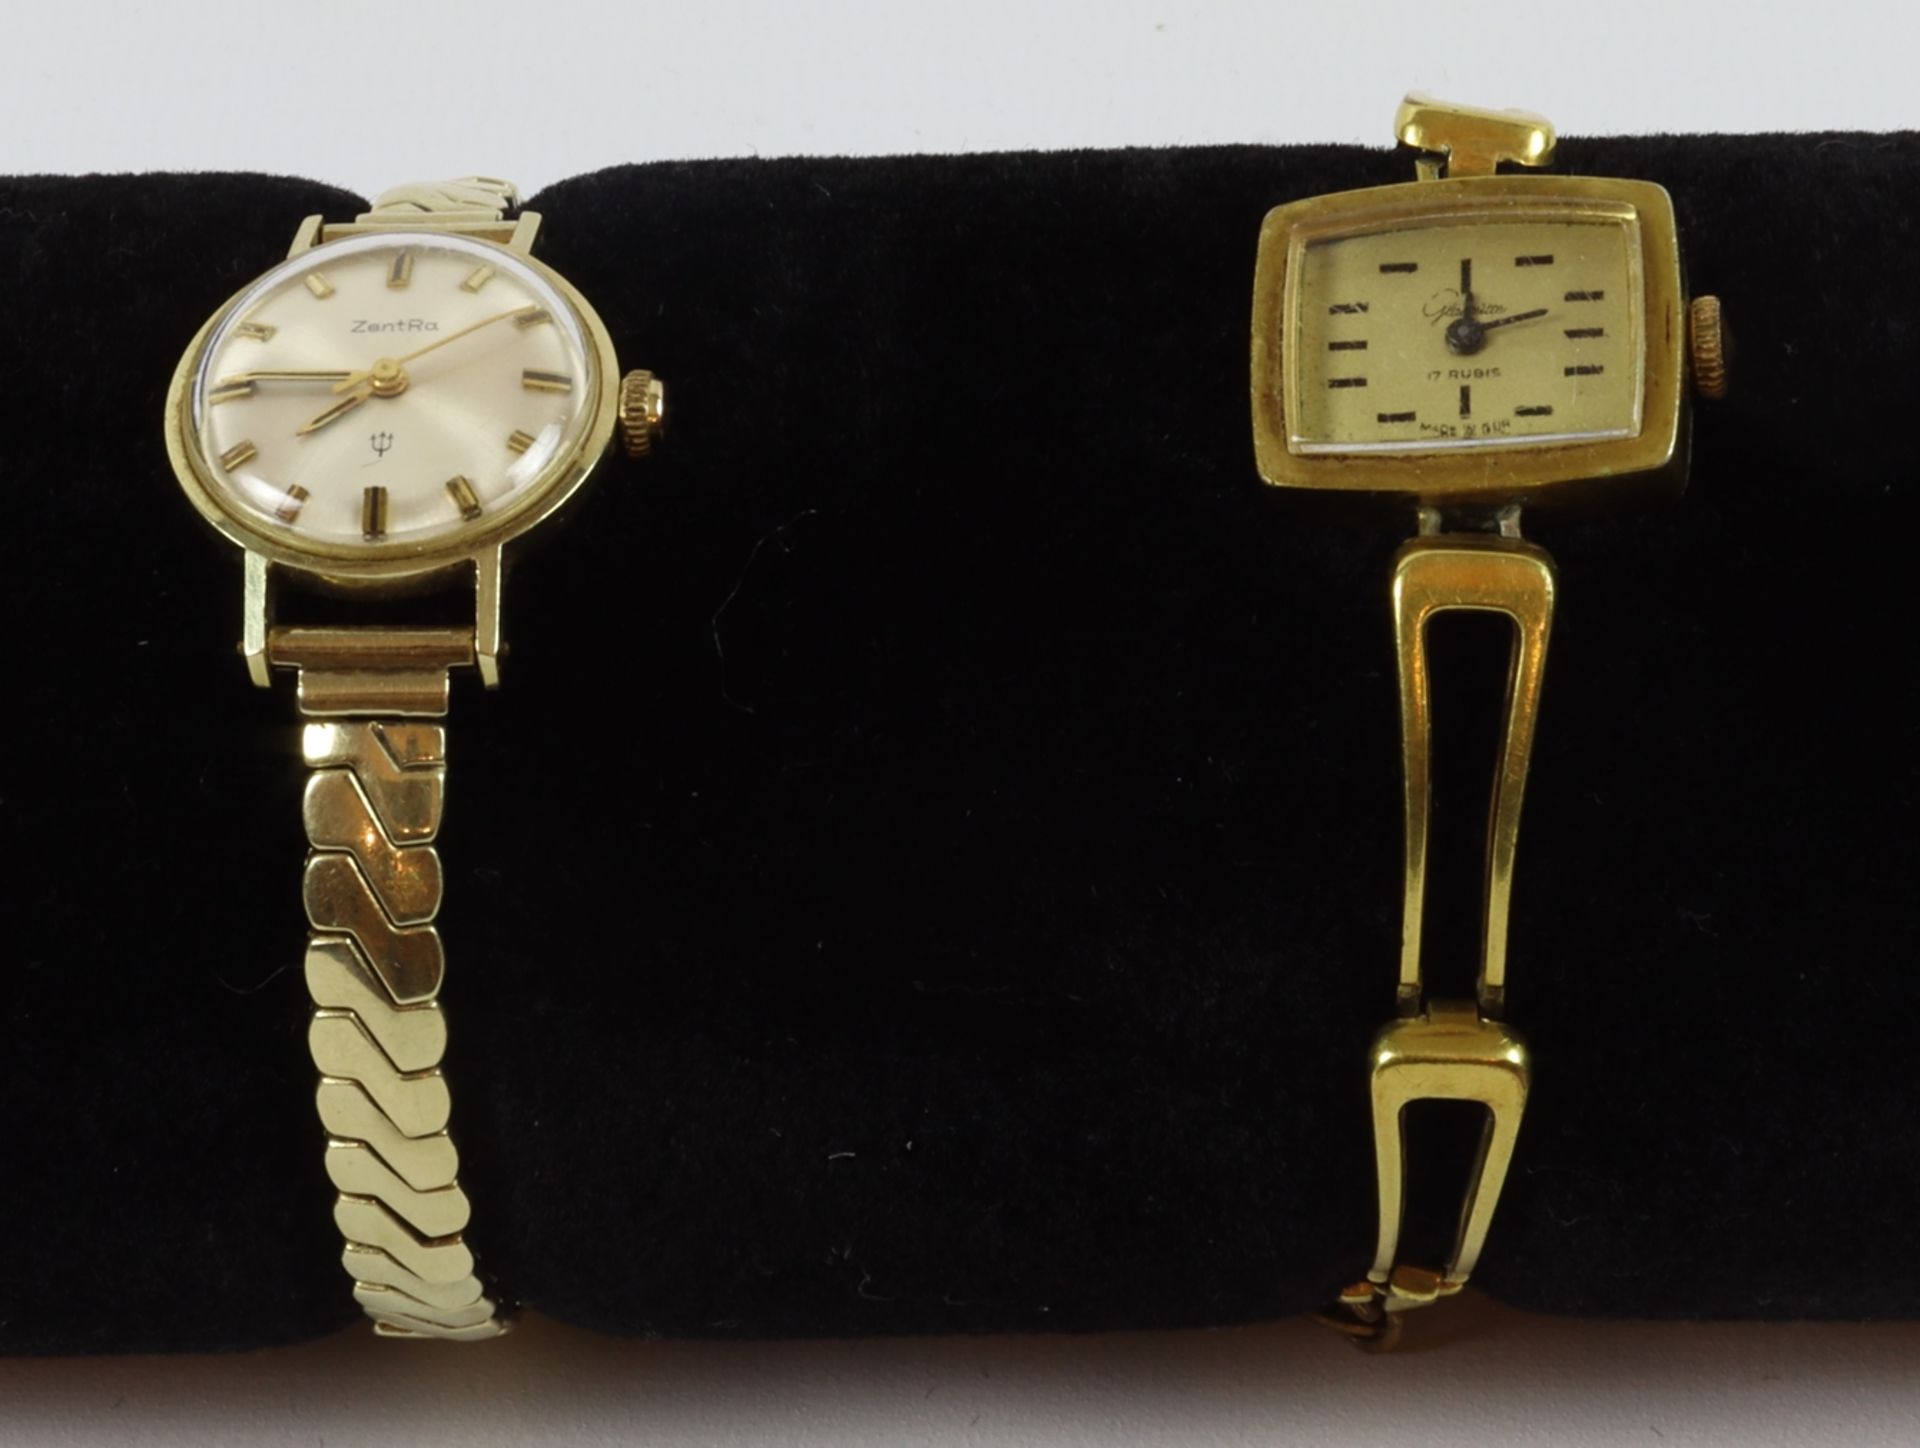 Two ladies' wristwatches, gold 585/1000 and gold-plated, 50s - 70s, GDR and FRG